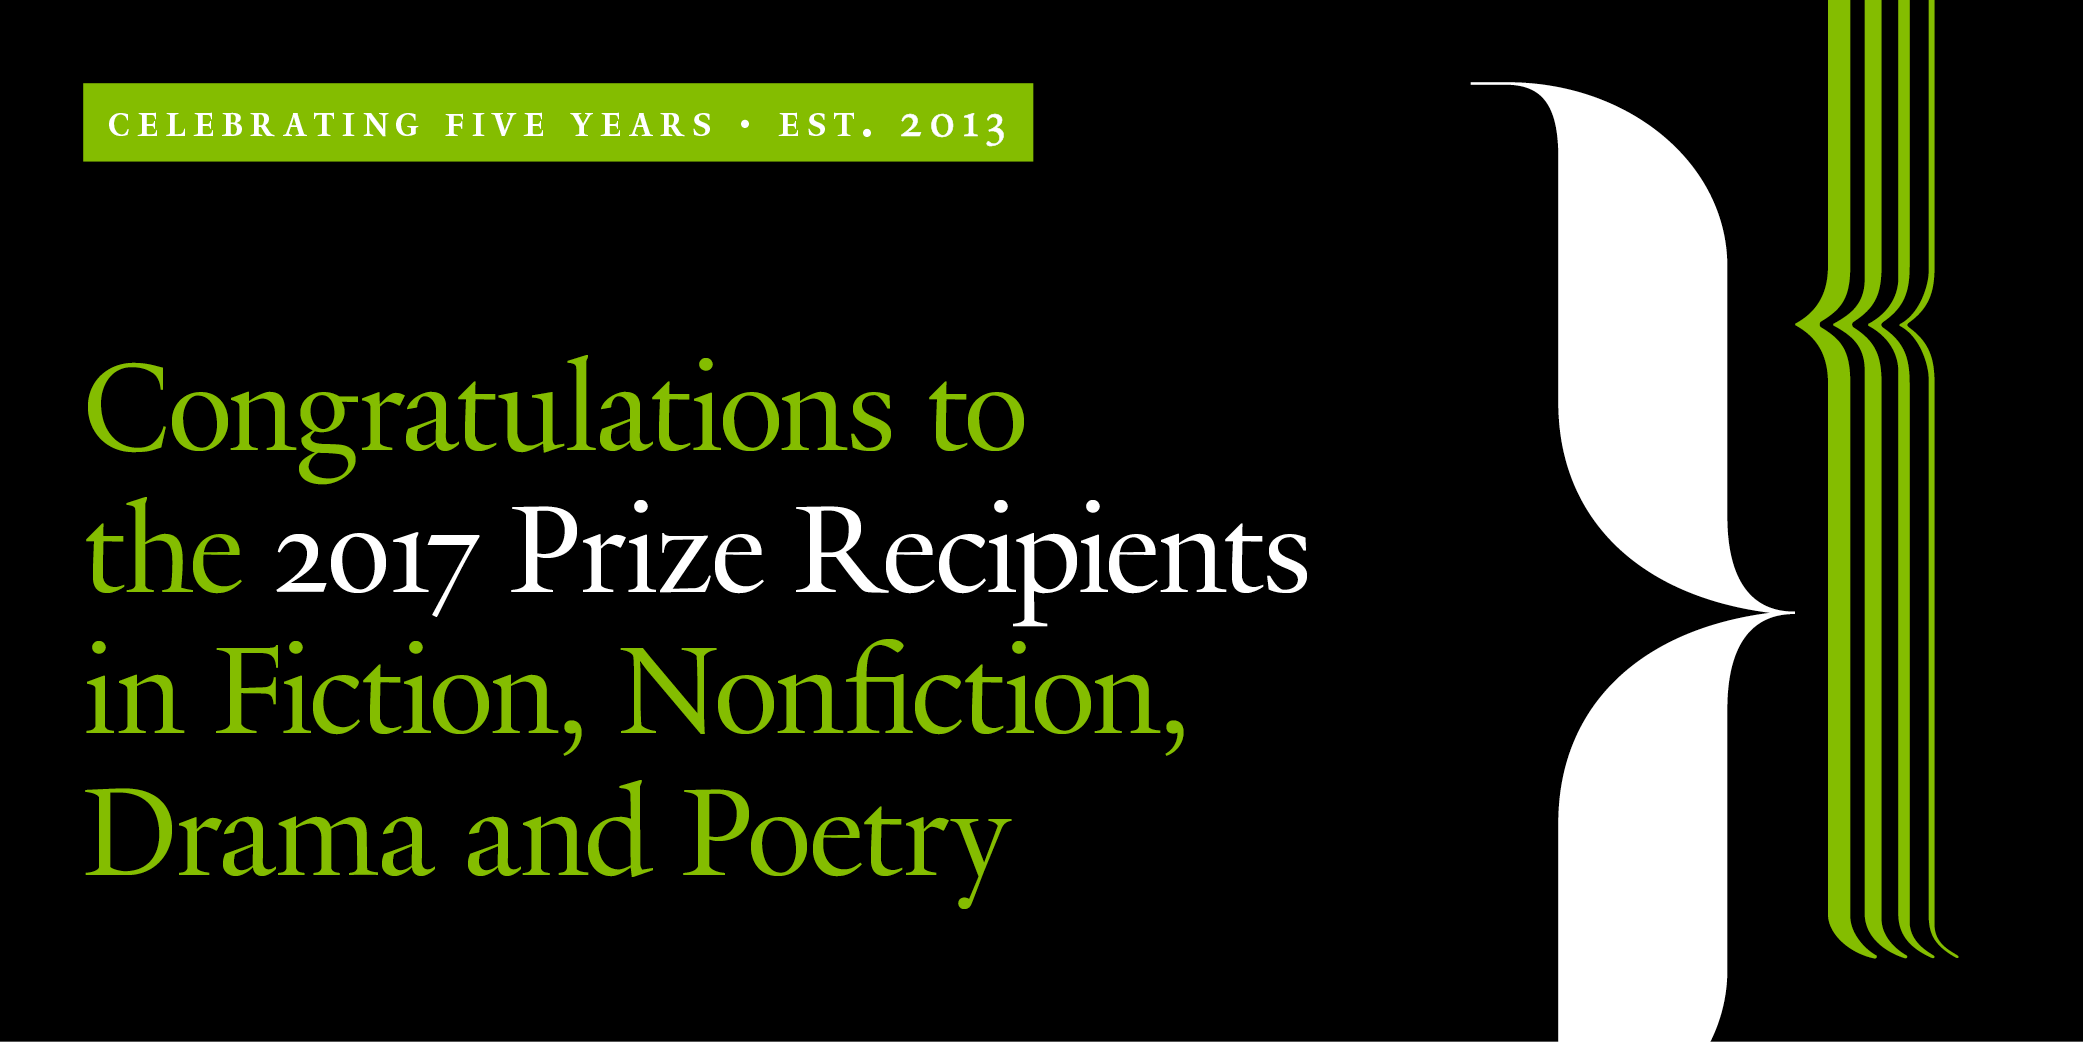 Windham-Campbell Prizes: The Phone Call of a Lifetime